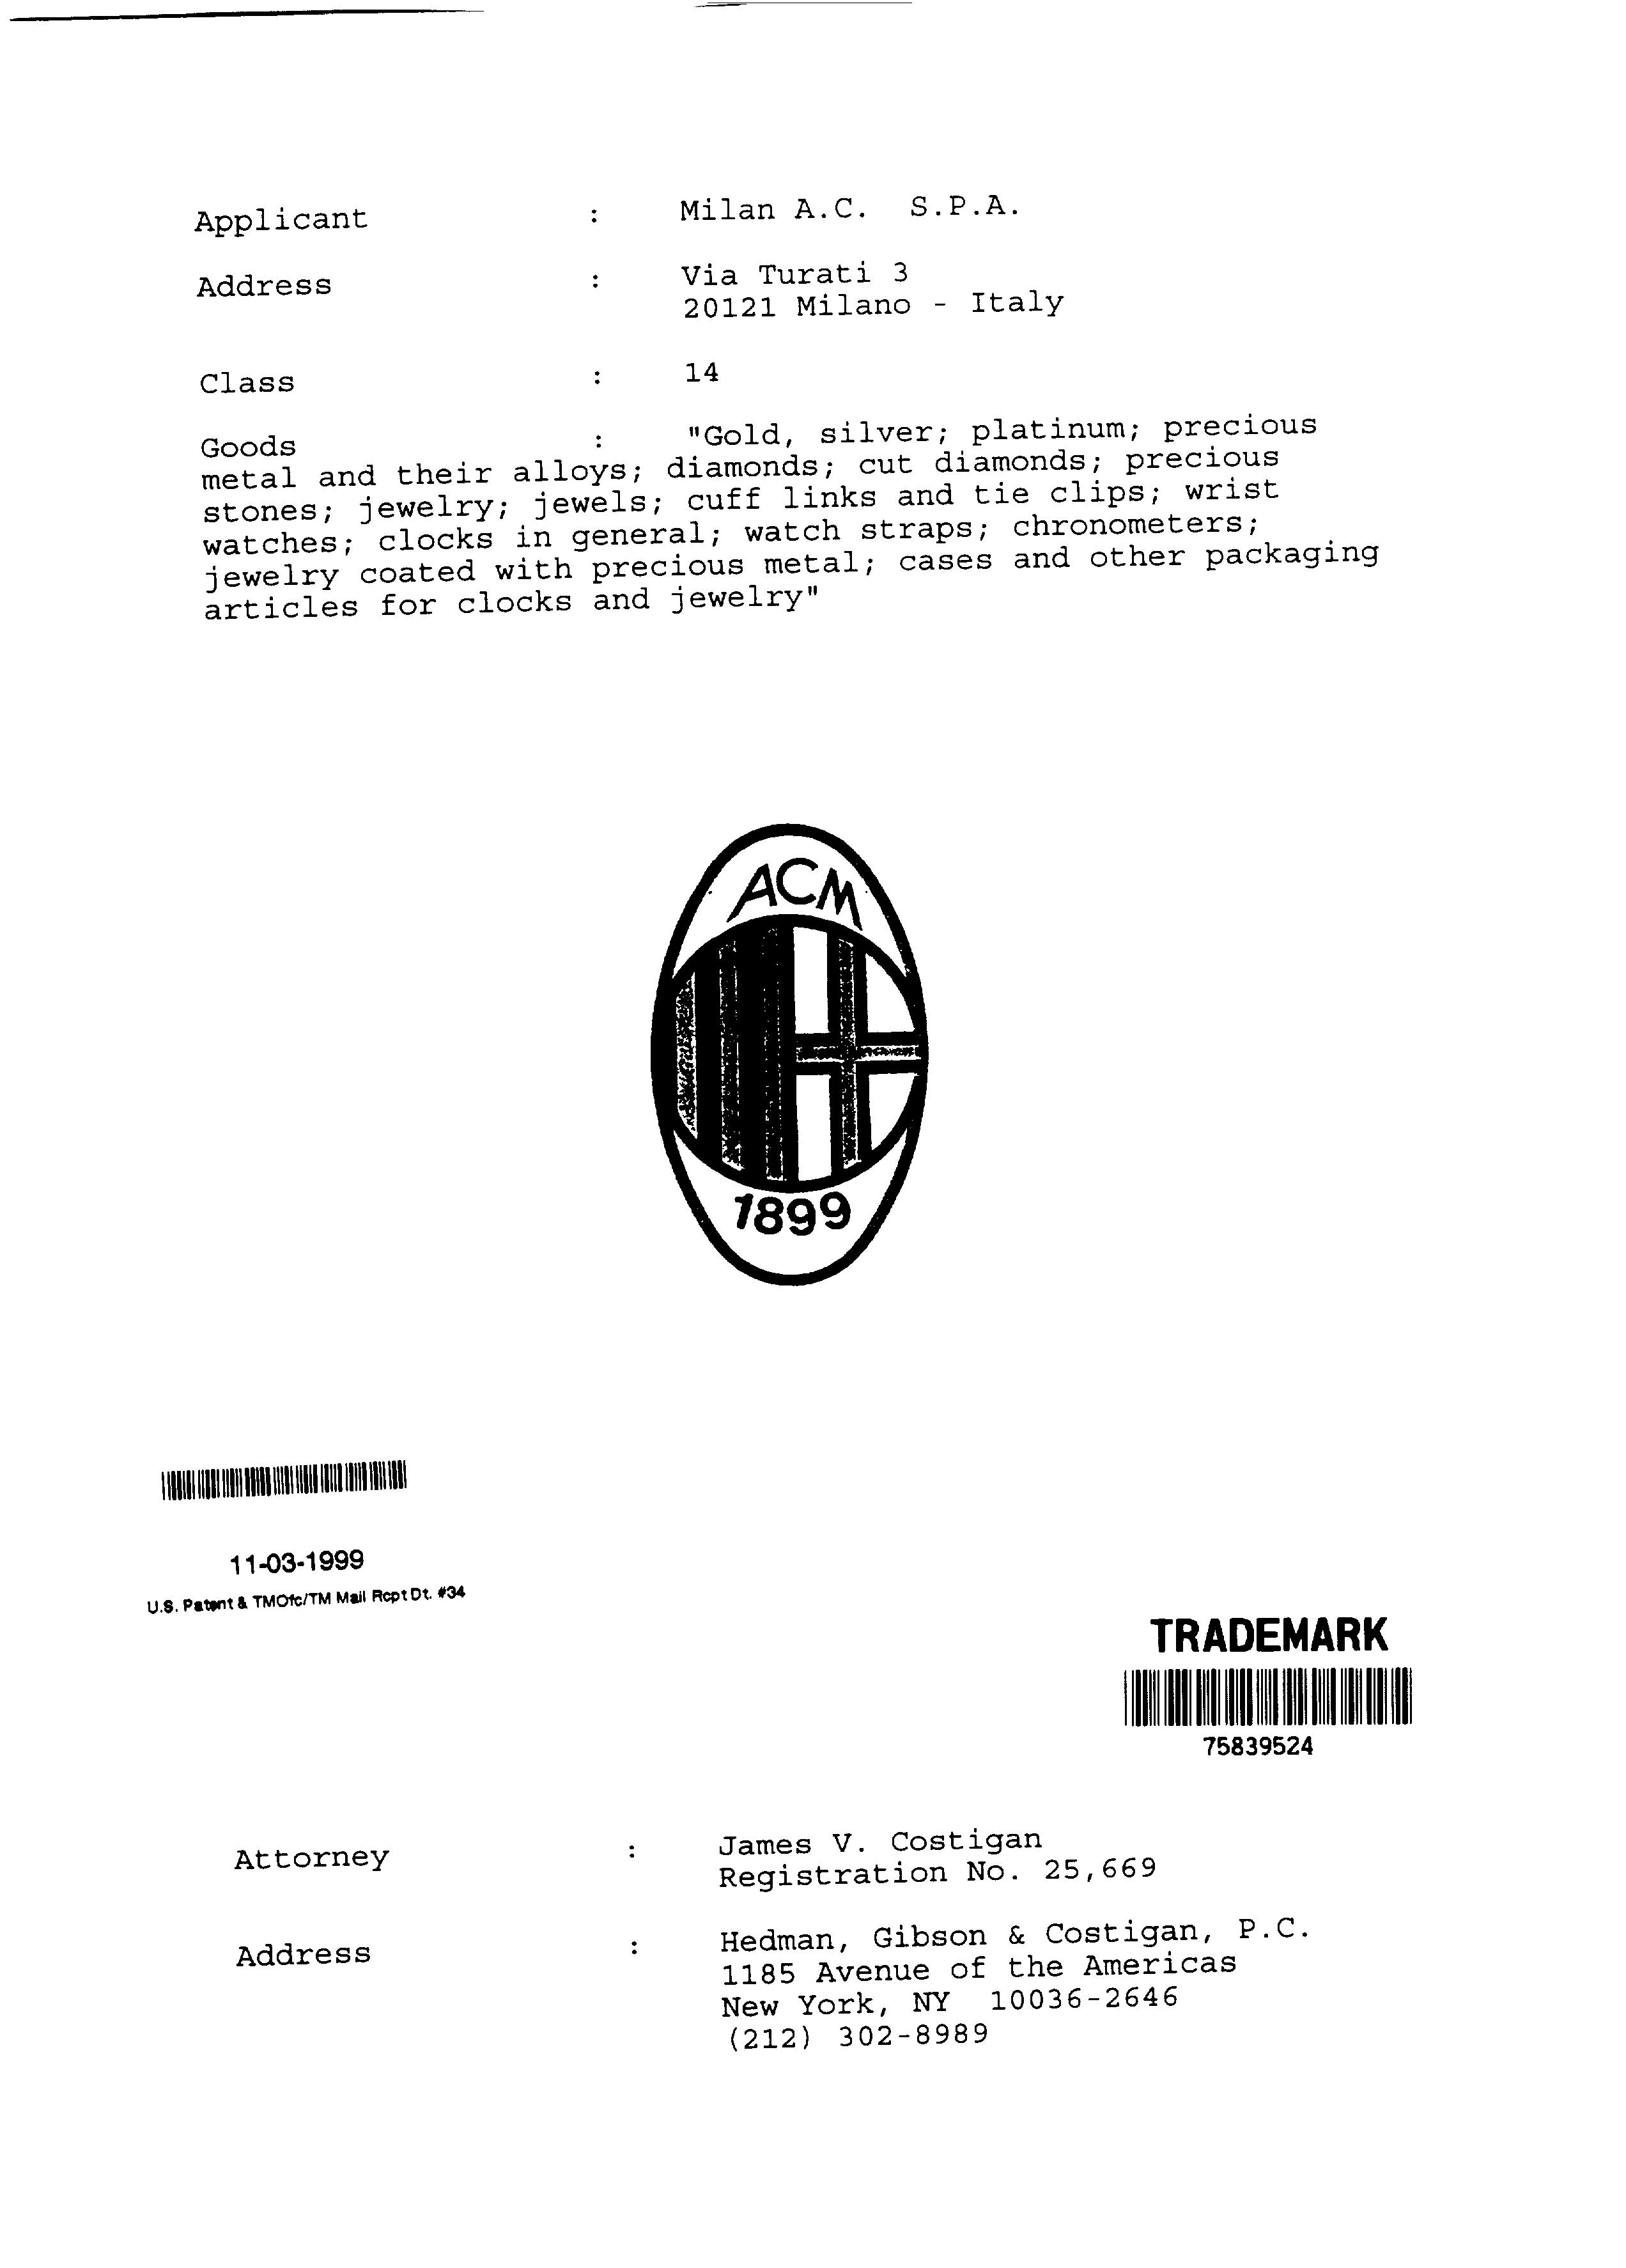 ACM 1899 AC MILAN Trademark of A.C. Milan S.p.A. - Registration Number  5893579 - Serial Number 79200885 :: Justia Trademarks